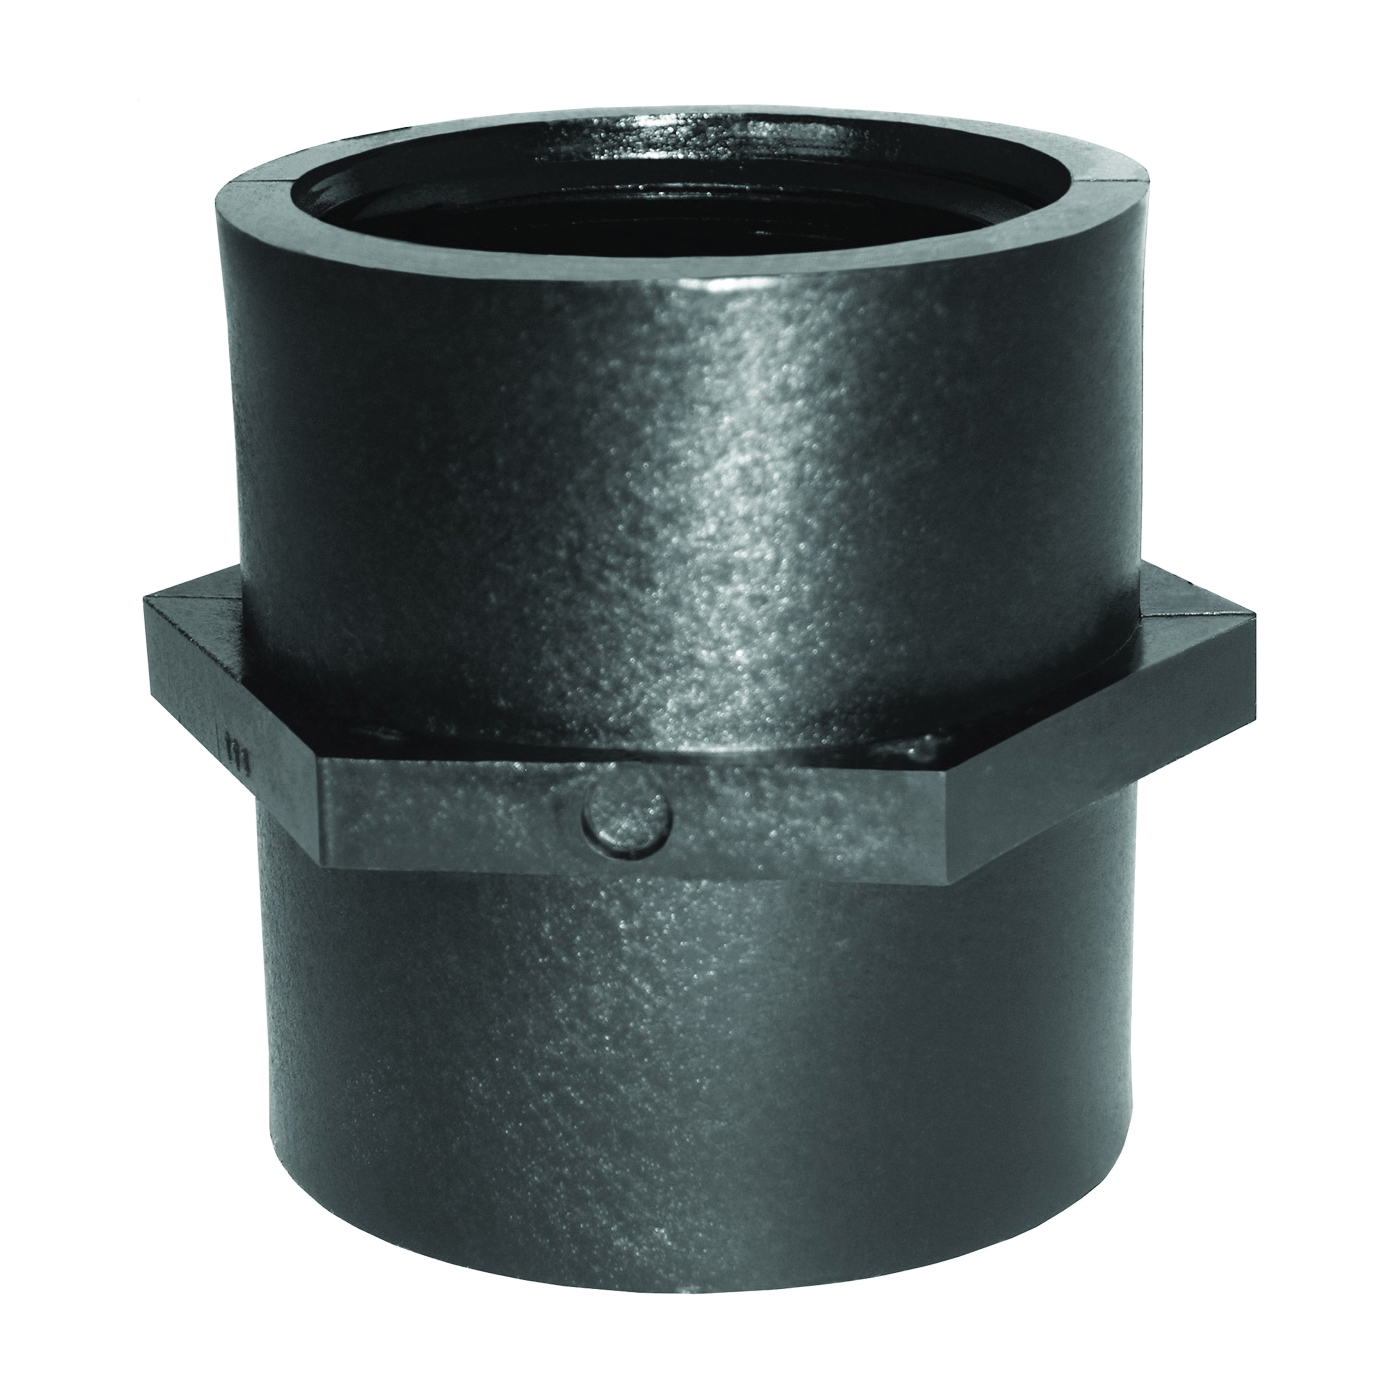 FTC 12 P Pipe Coupling, 1/2 in, Female NPT